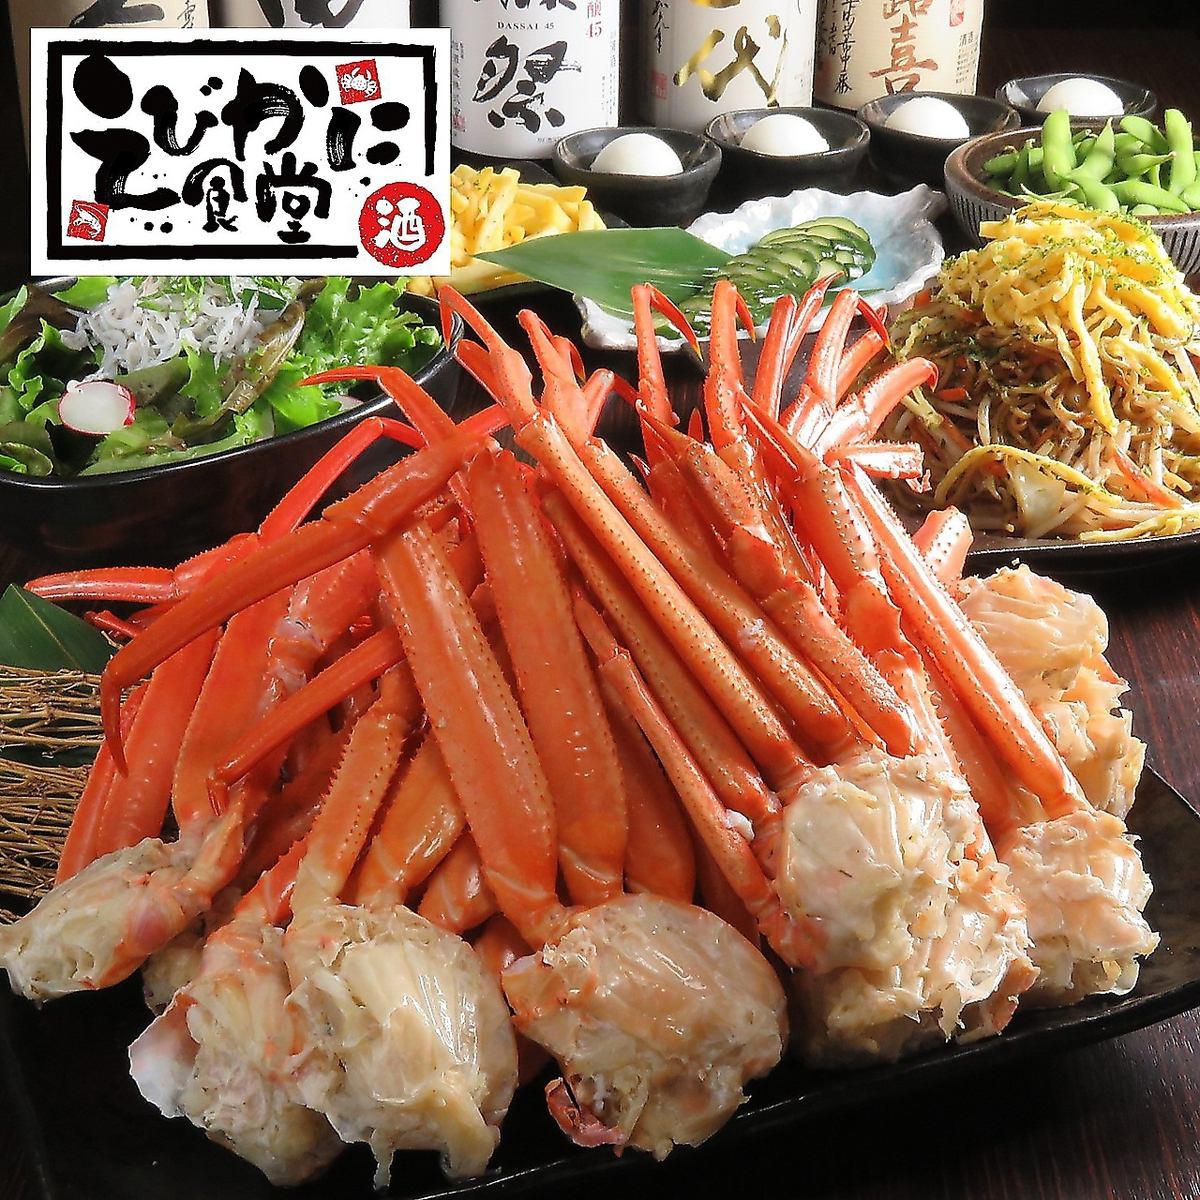 ★All-you-can-eat snow crab and all-you-can-drink